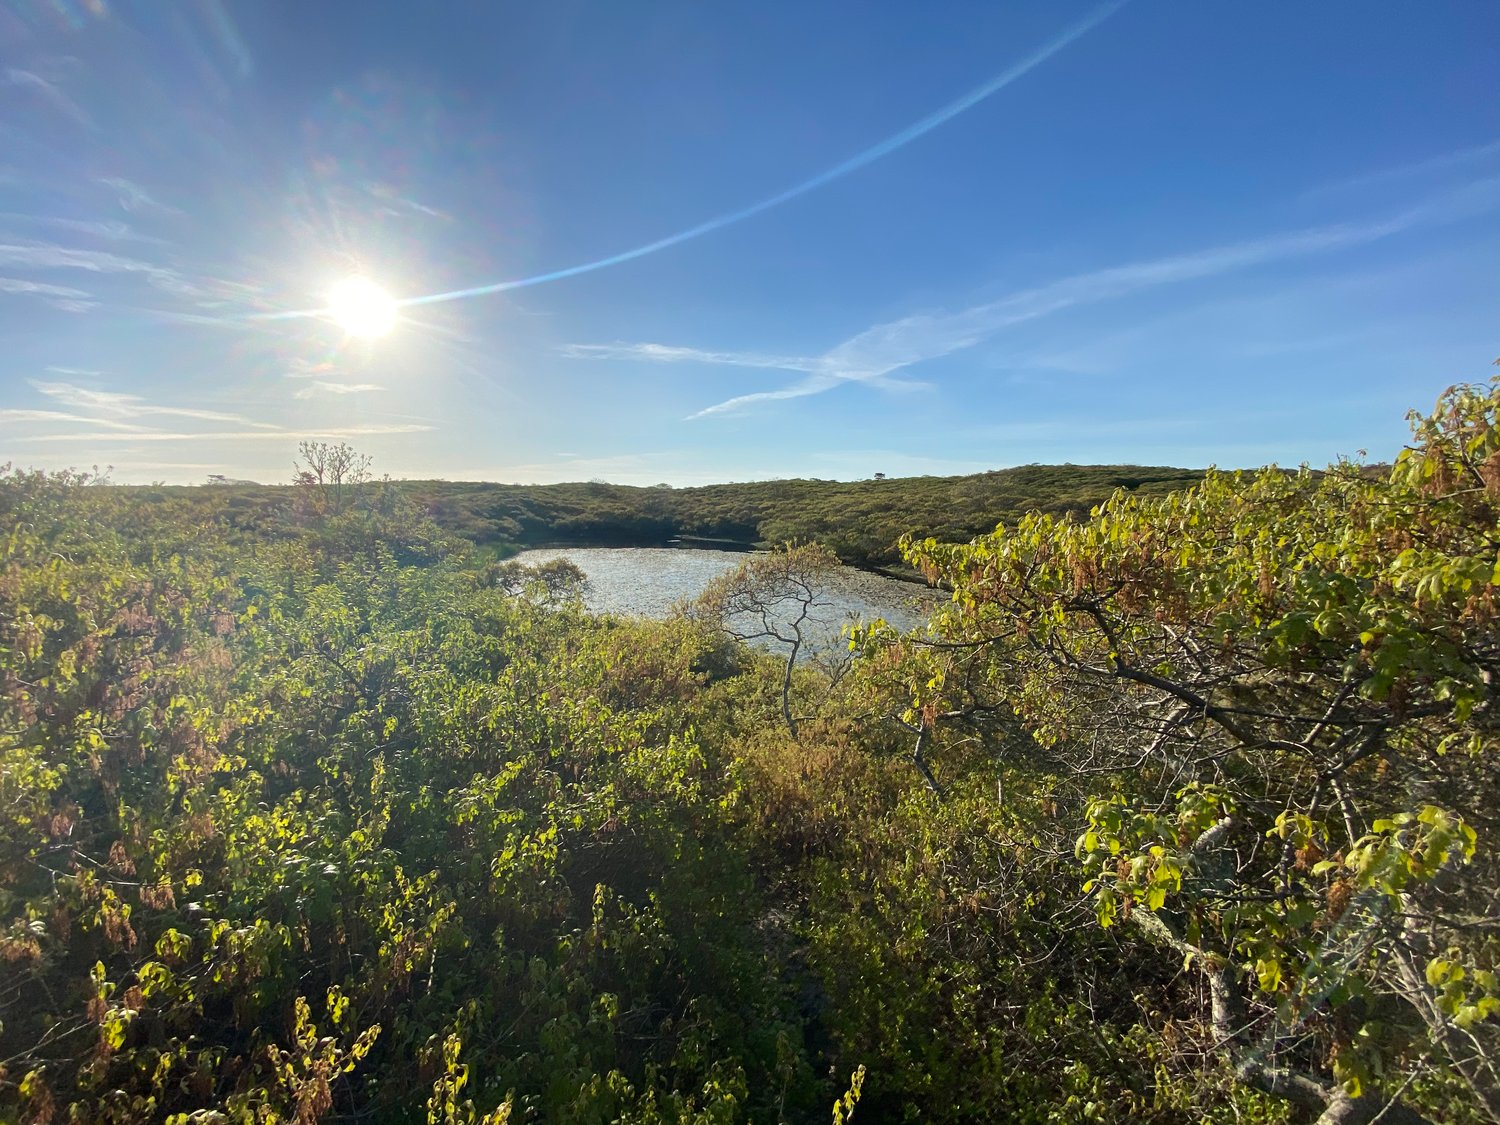 The north Wigwam Pond near Altar Rock in the Middle Moors. Both the north and south ponds are settled quite deep into the land and contain water year-round.